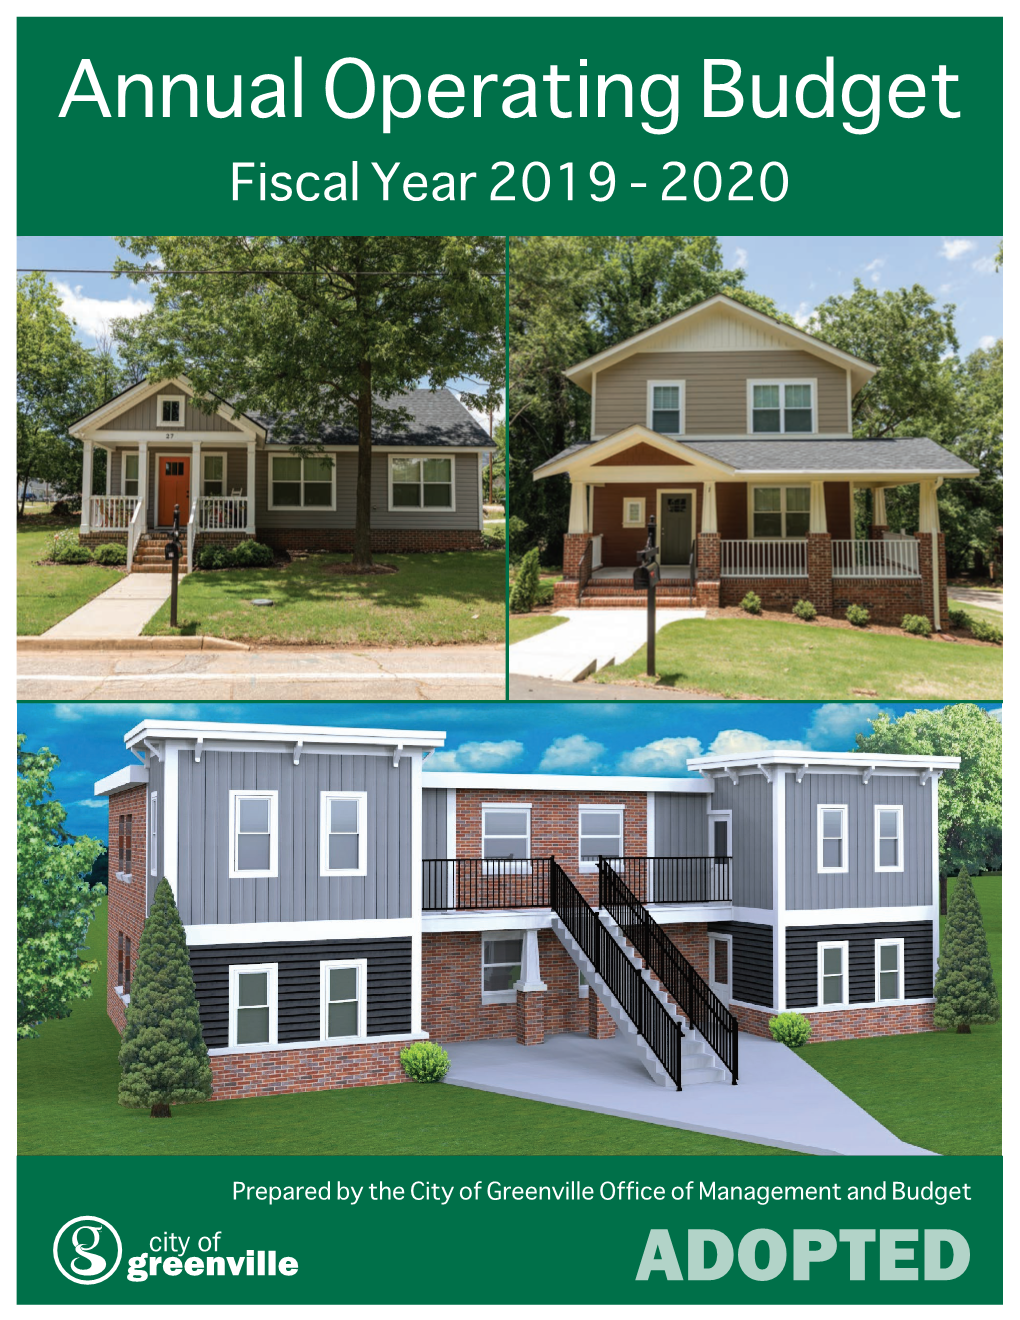 City of Greenville Fiscal Year 2019-20 Adopted Budget